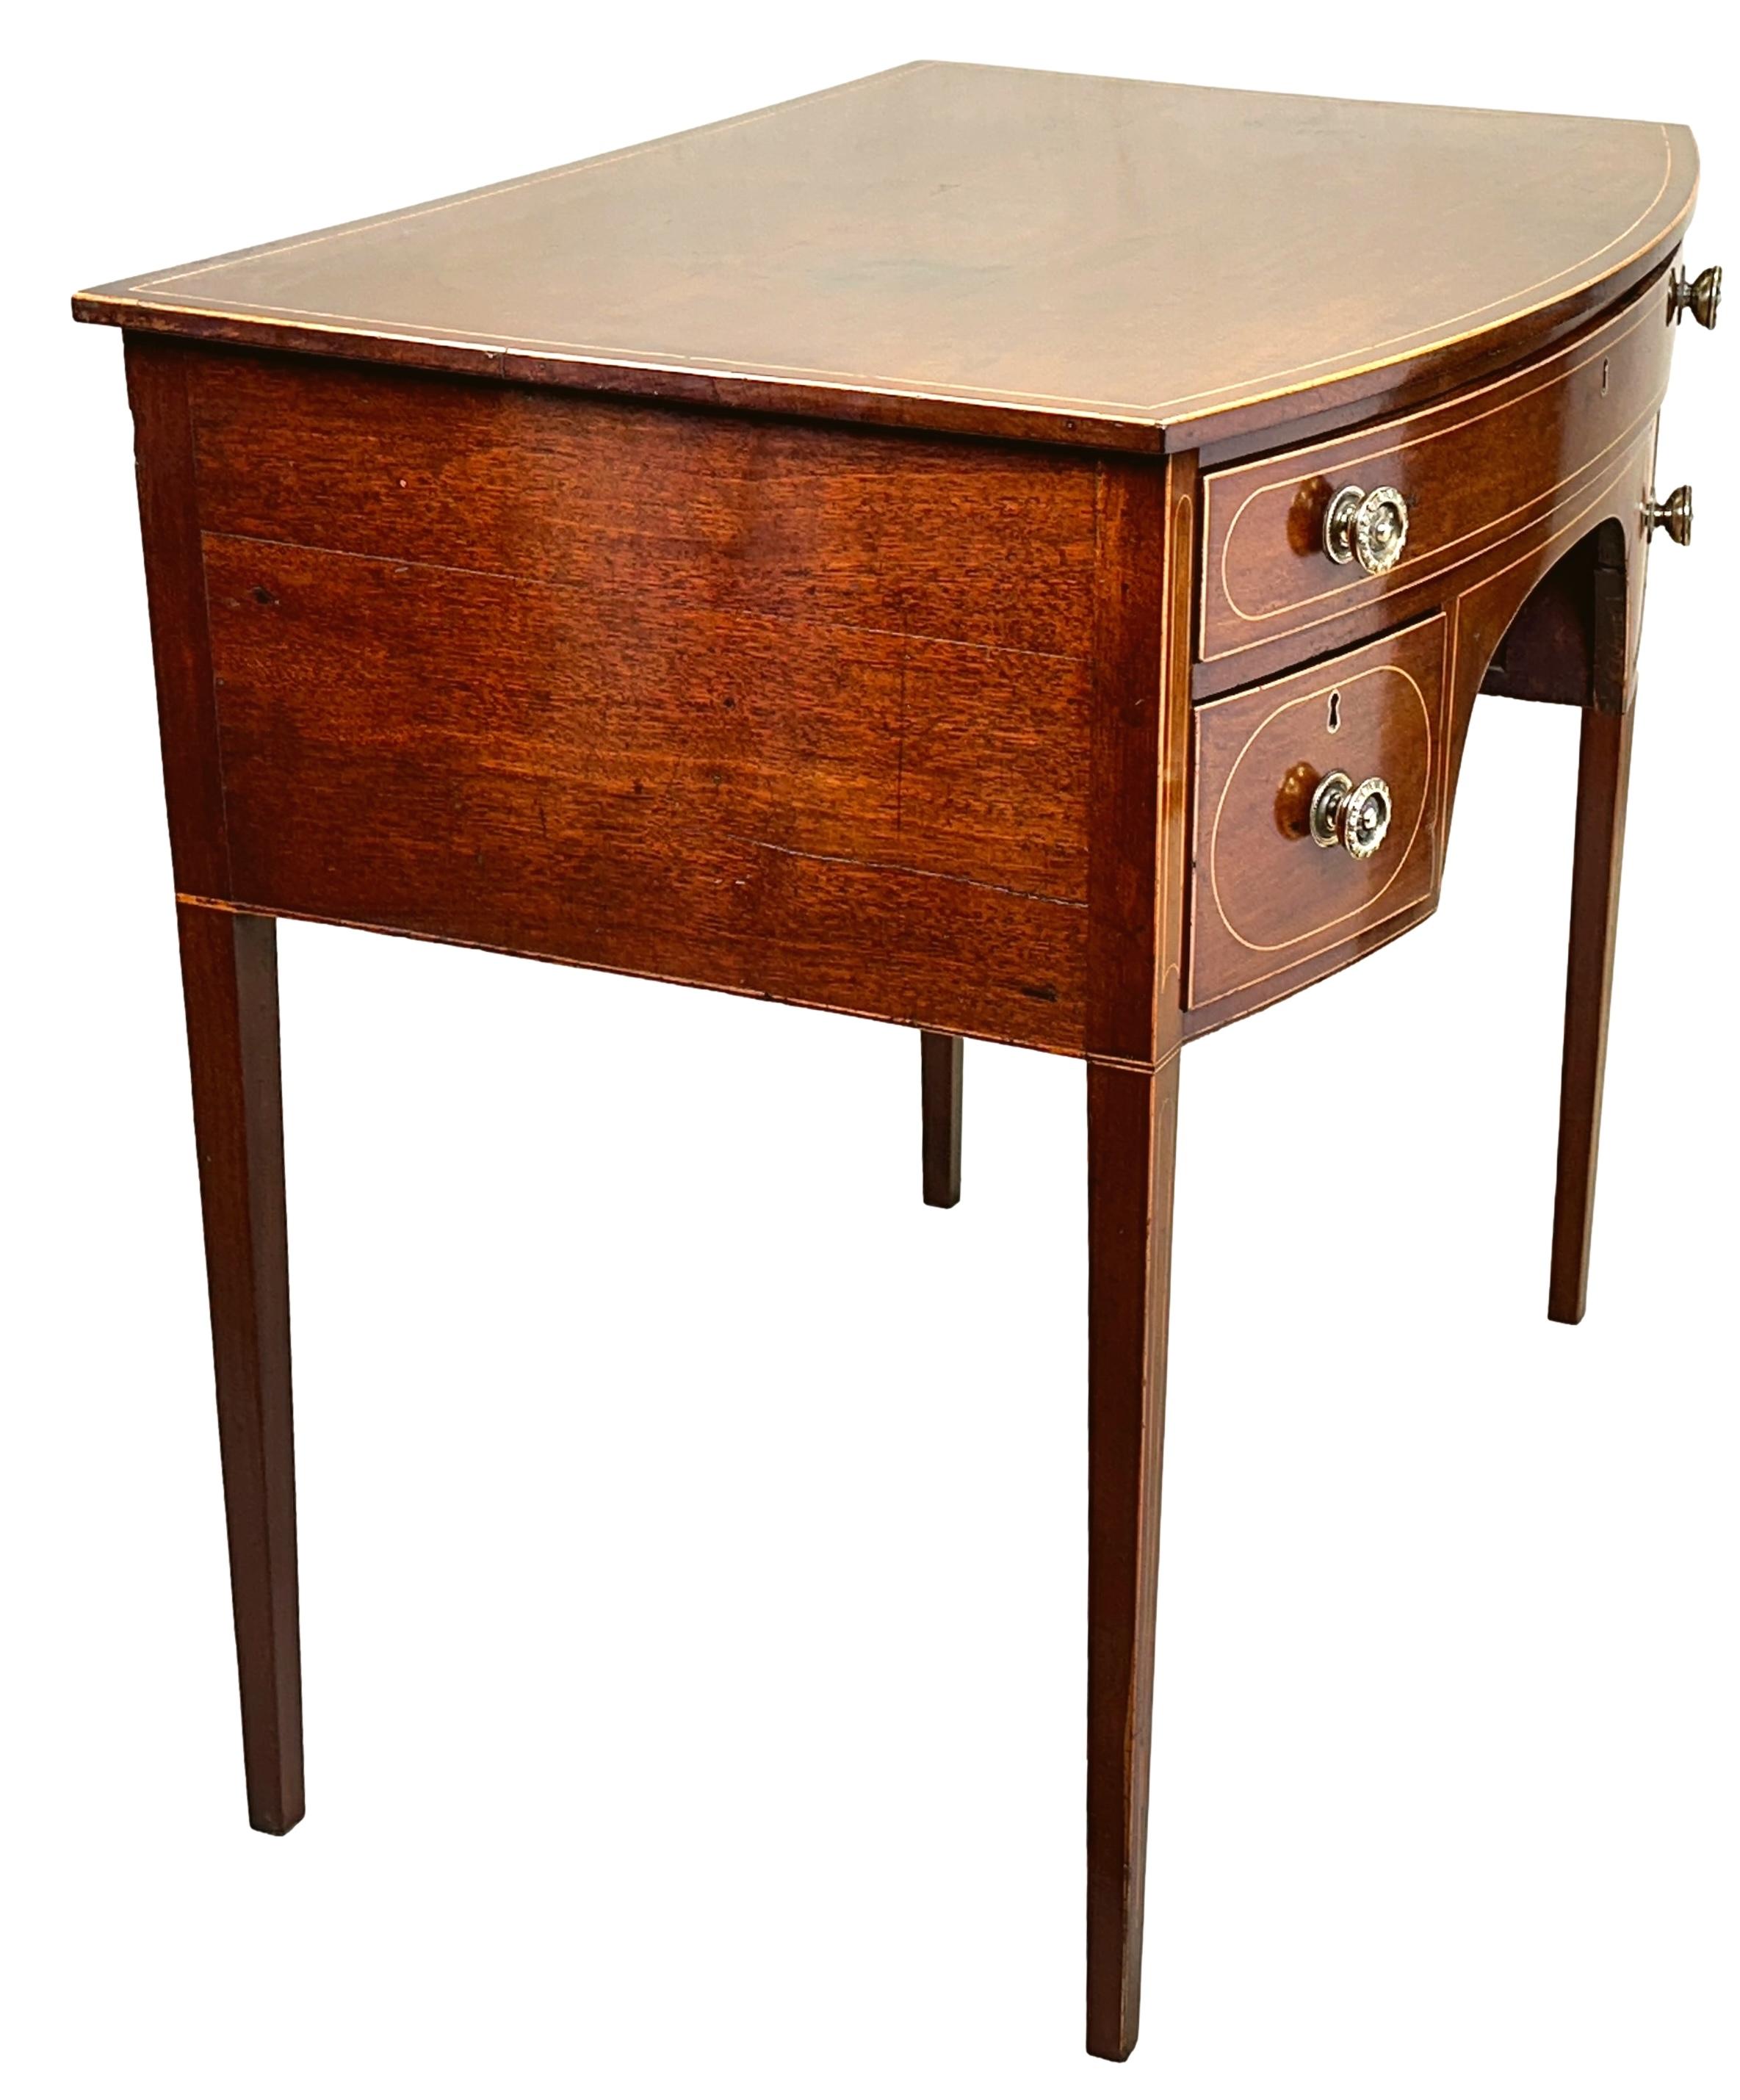 An Extremely Good Quality Late 18th Century Mahogany Bowfronted Dressing Table, Of Good Large Proportion, With Well Figured Top Over One Long And Two Short Drawers Having Replacement Brass Knobs, Raised On Elegant Square Tapering Legs With